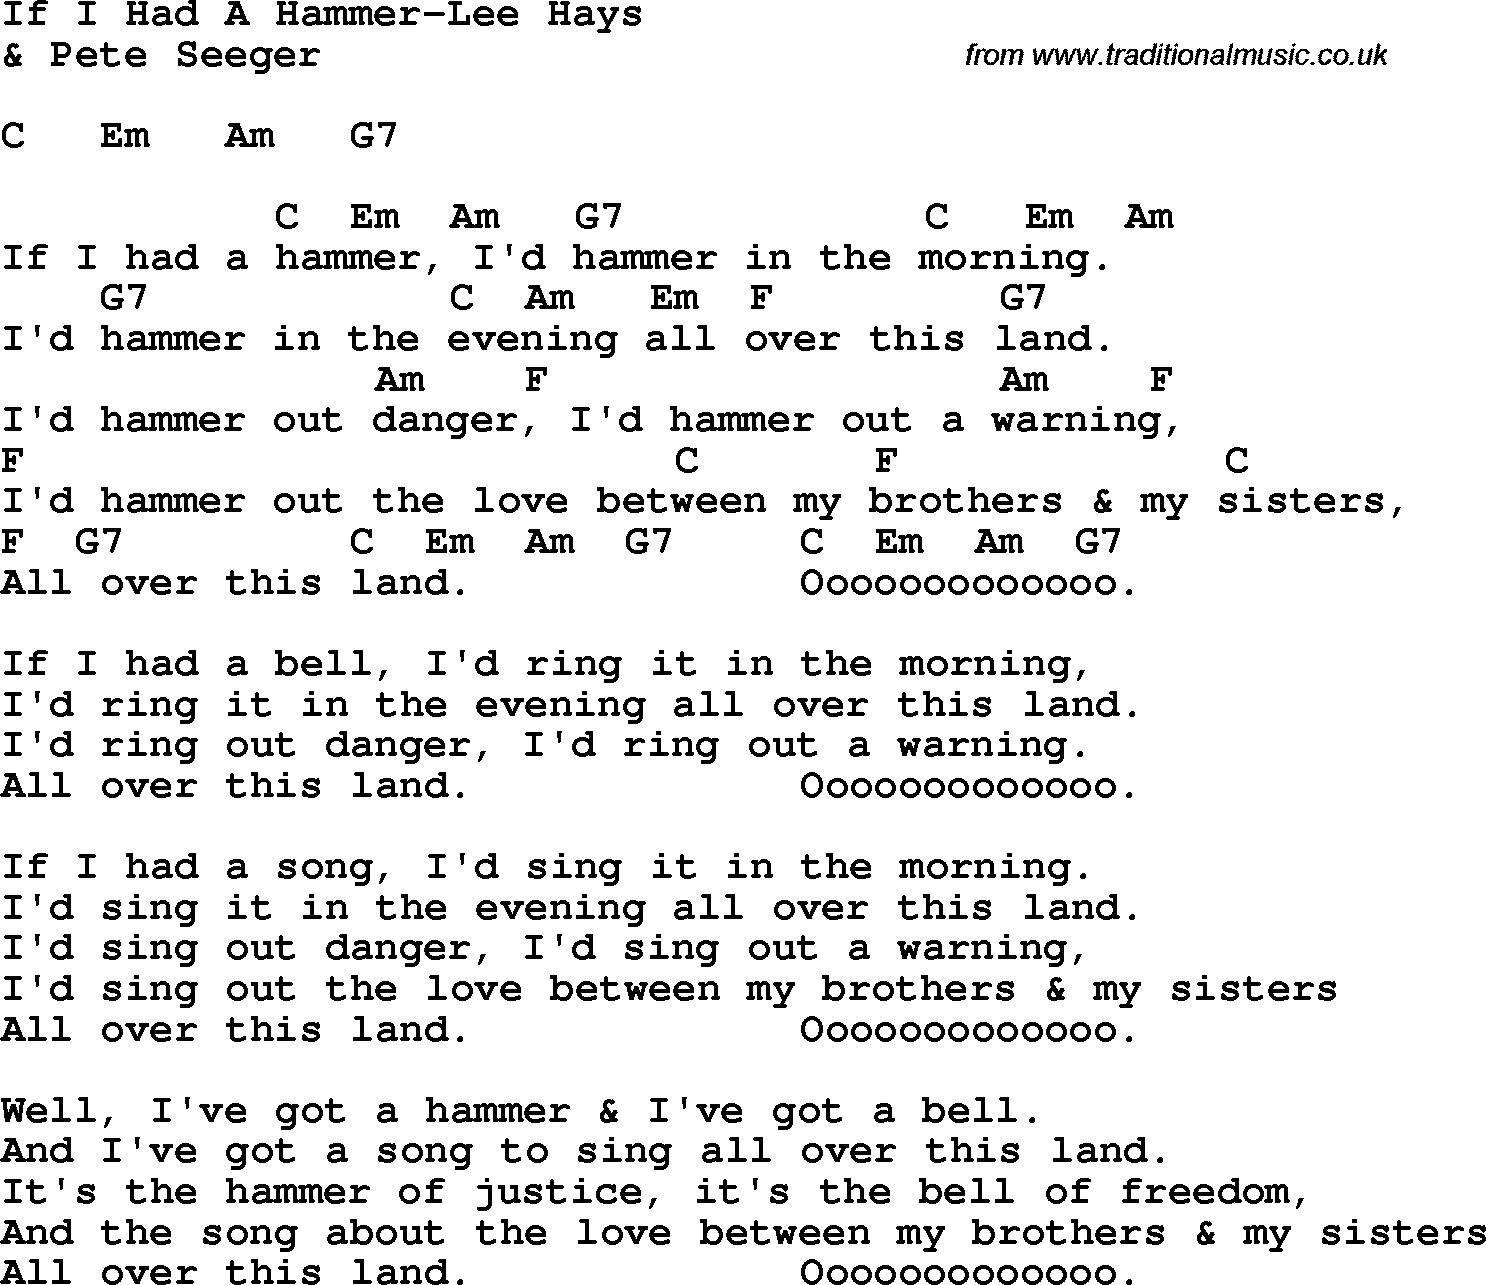 Protest Song If I Had A Hammer-Lee Hays lyrics and chords